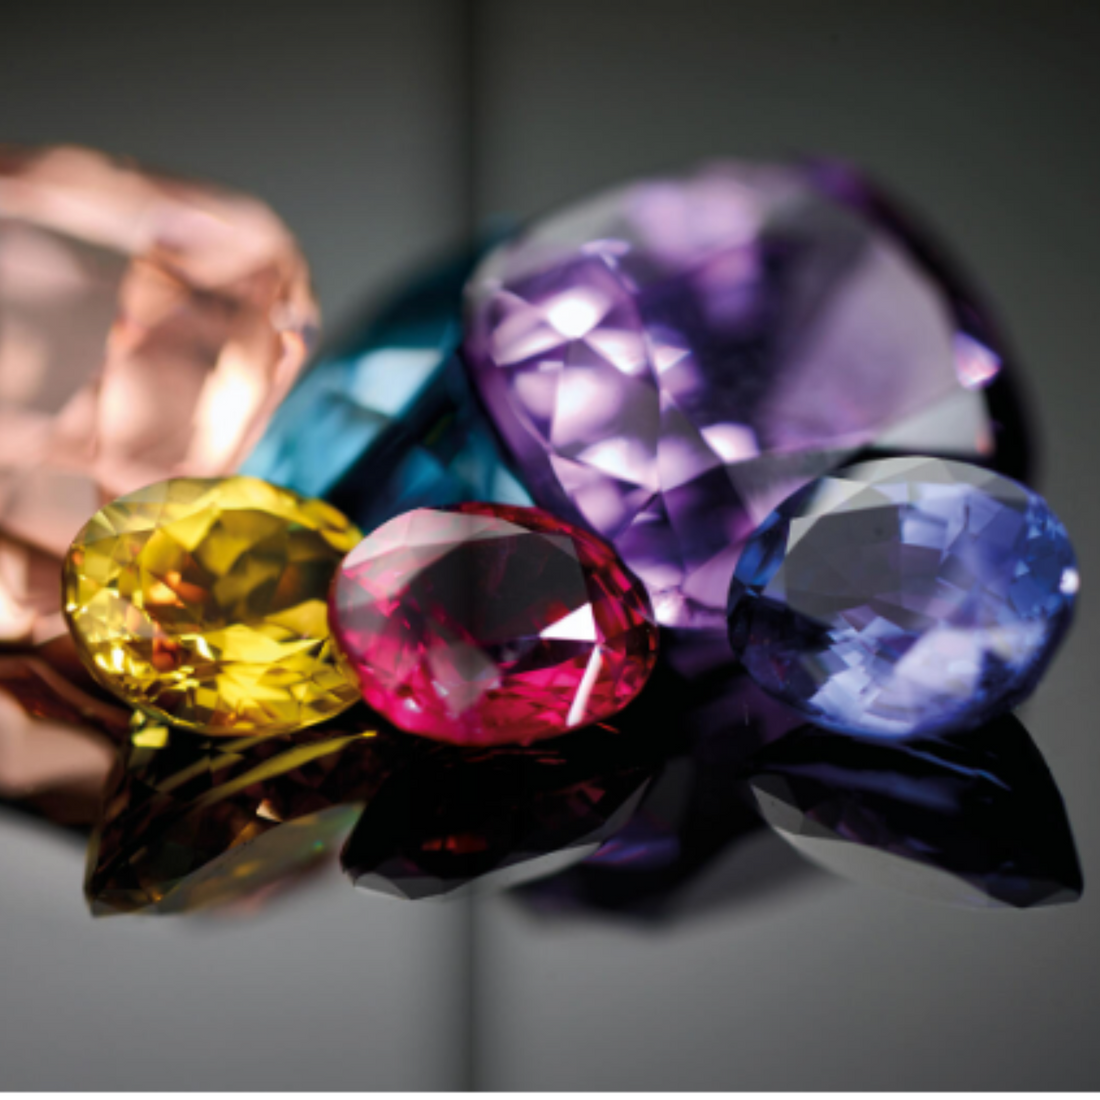 Buy Precious Gems and Stones Online - Purchase Gems and Minerals Online